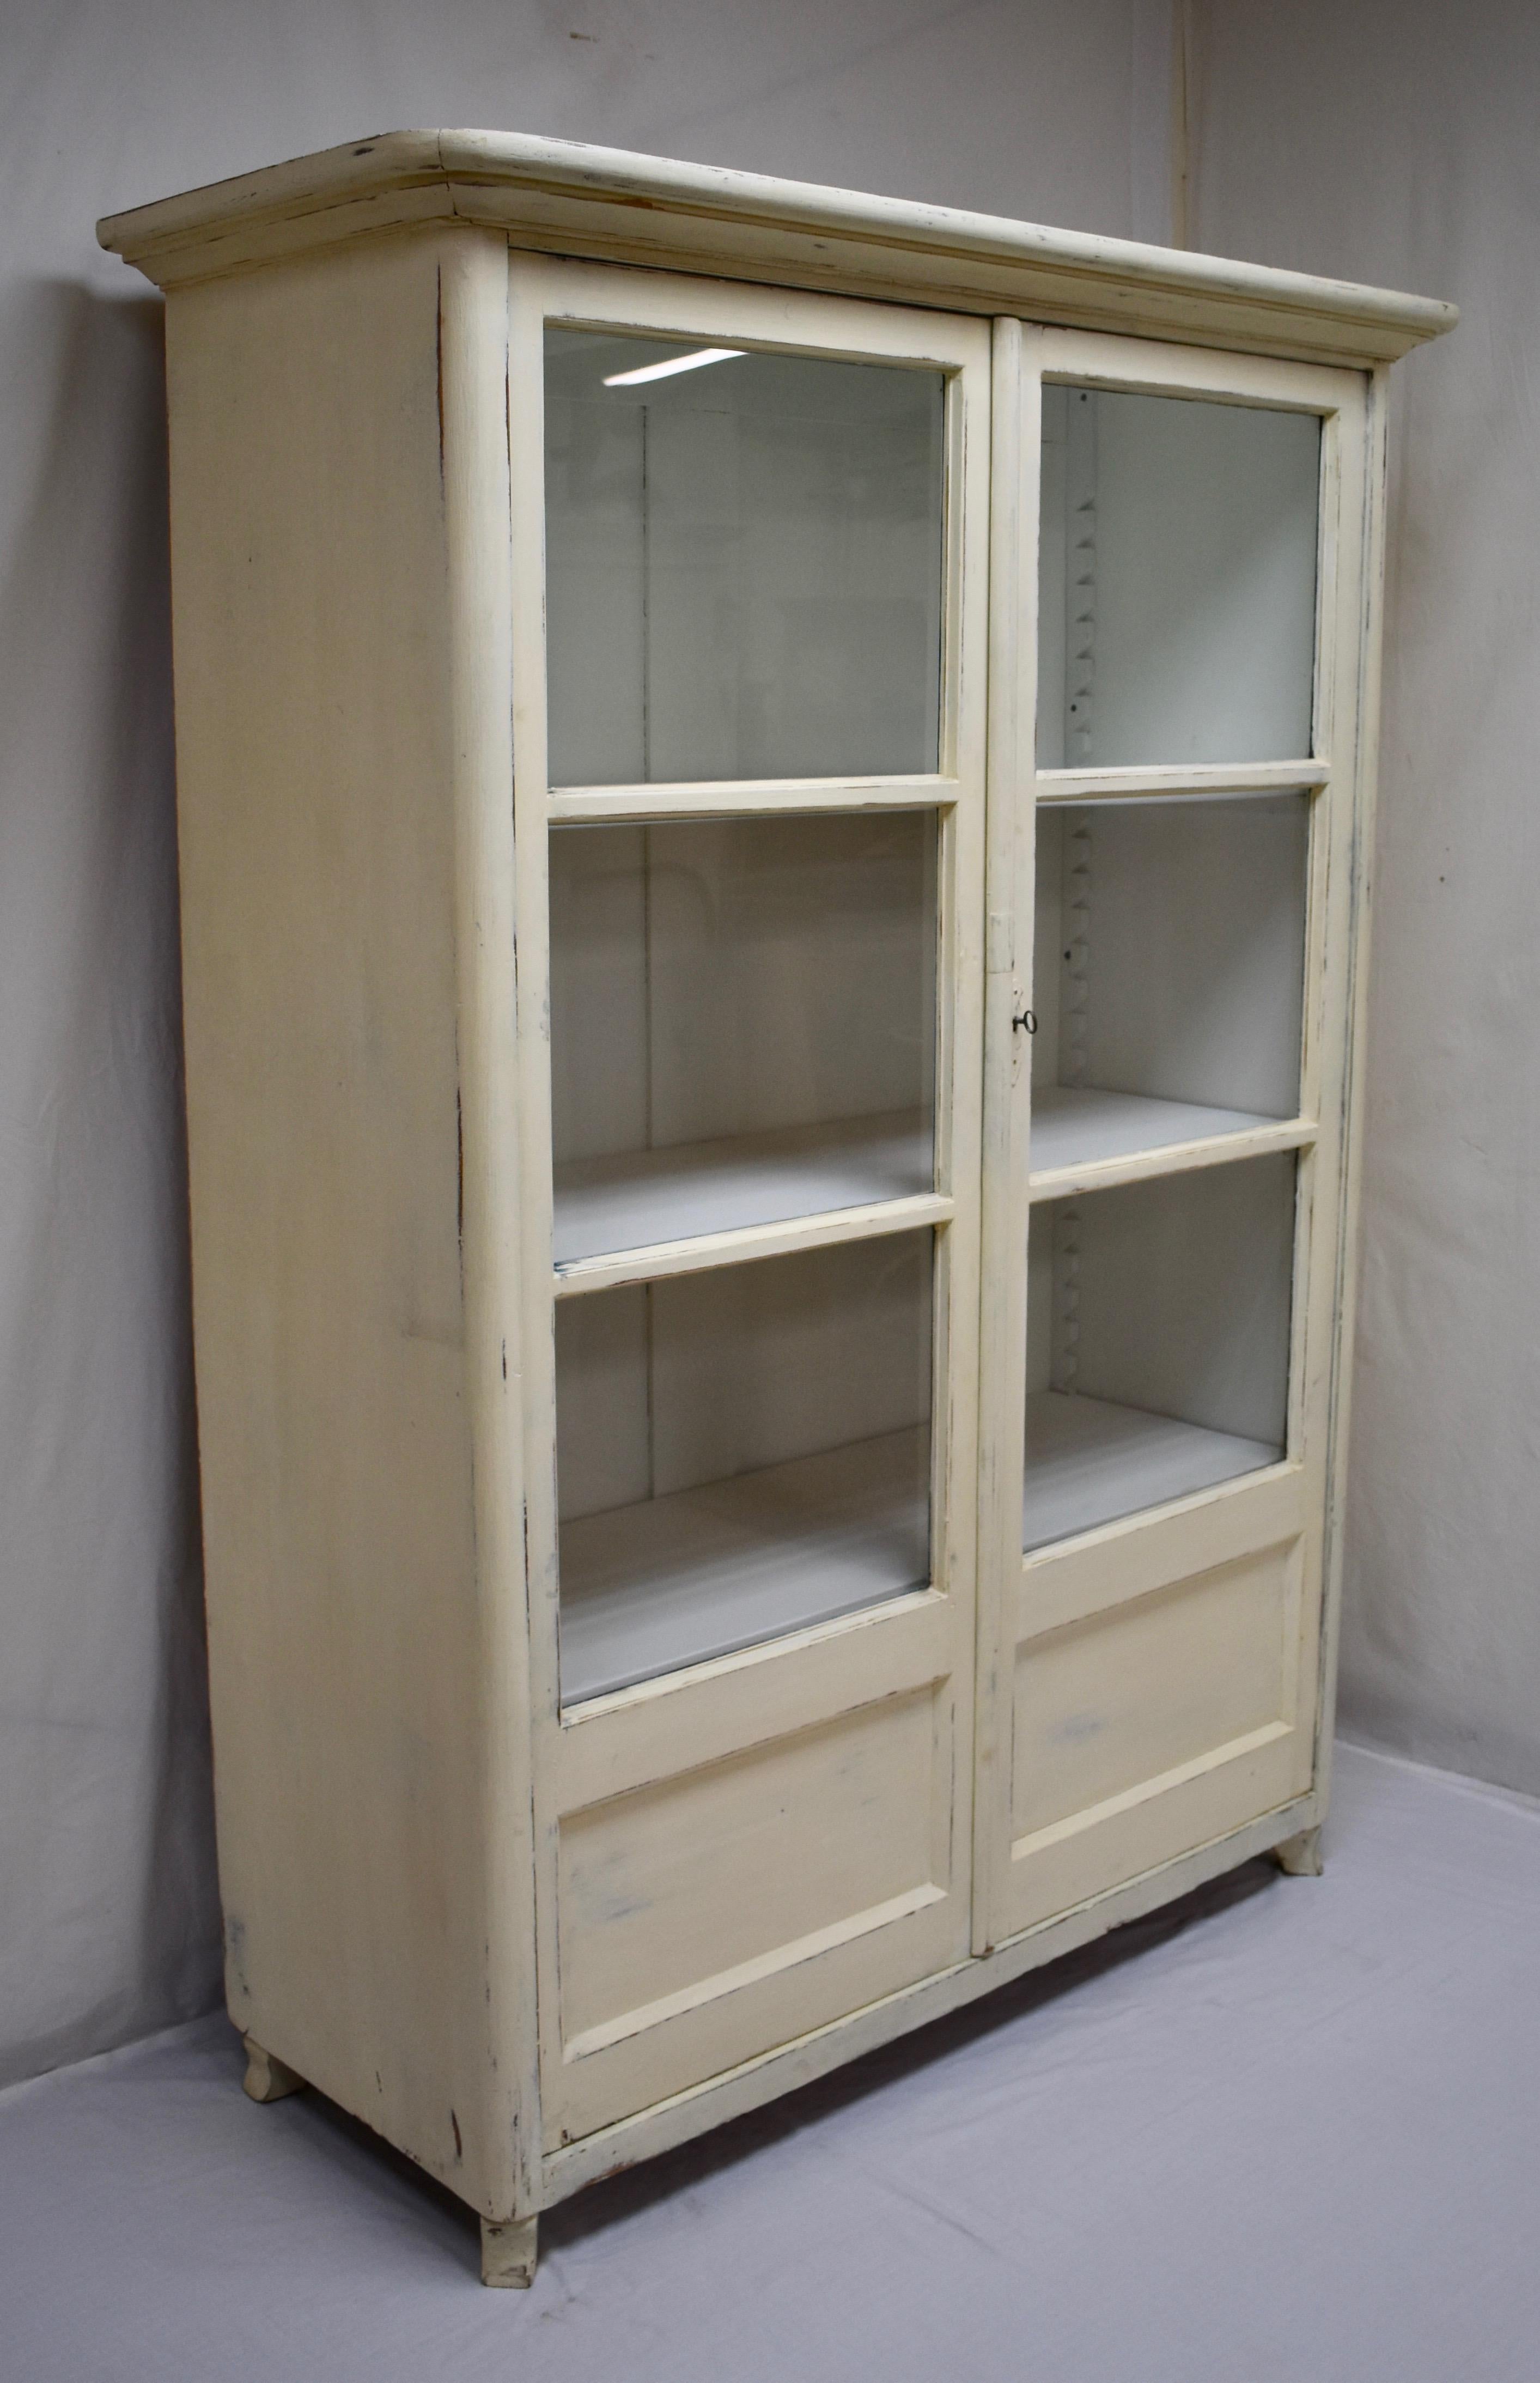 This is a sturdy two-door glazed cabinet built from 1” thick yellow pine. Beneath a bold crown molding are two pivot-hinged doors, each with three glazed panels with a blind panel at the bottom. The front corners of the cabinet are gently rounded to